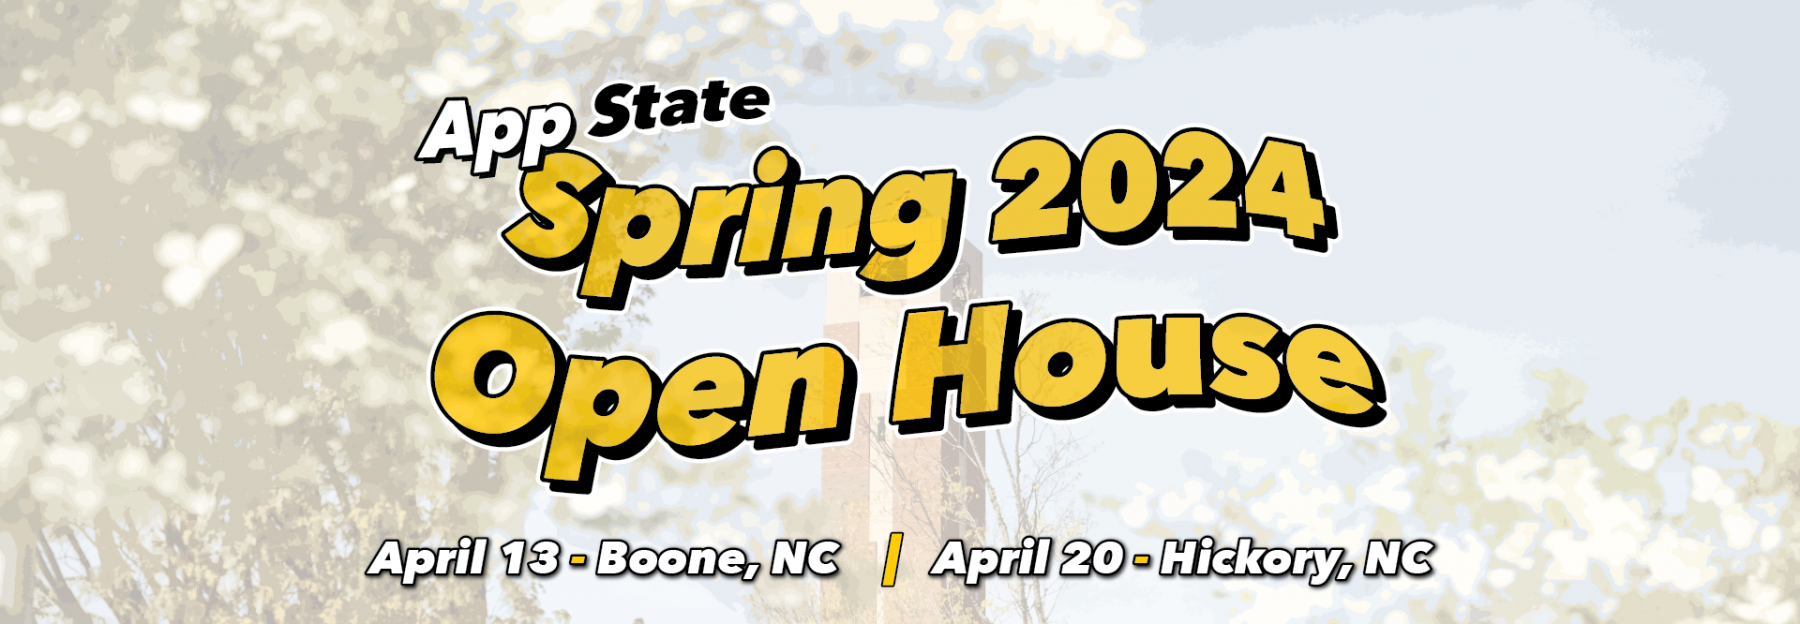 App State's Spring 2024 Open House's are taking place in Boone, NC on April 13 and in Hickory, NC on April 20..